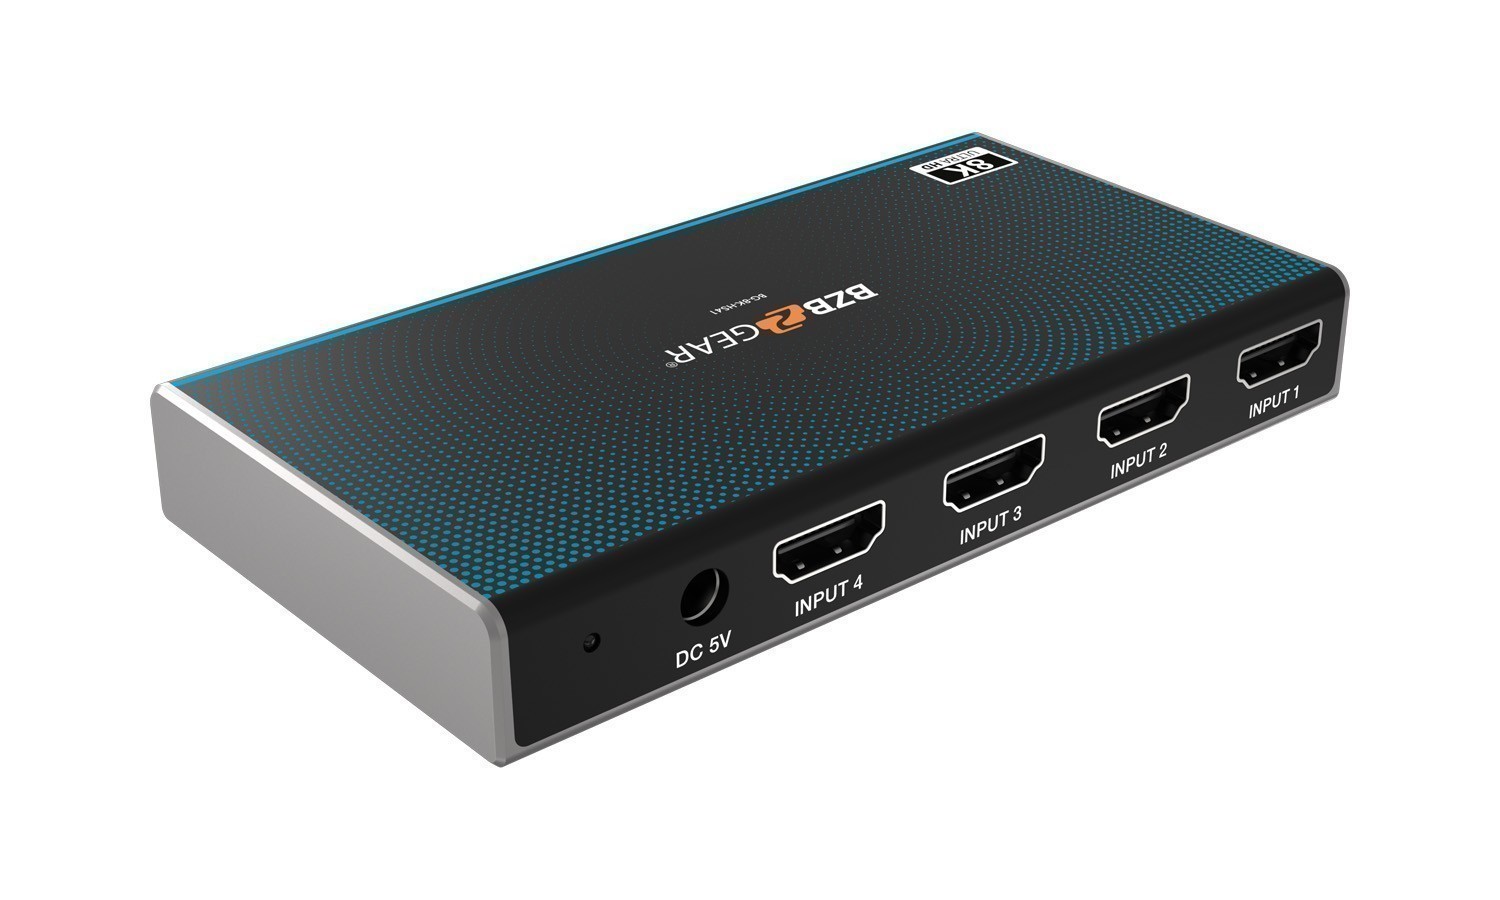 HDMI switch 4K 120Hz, Ideal for 4K gaming